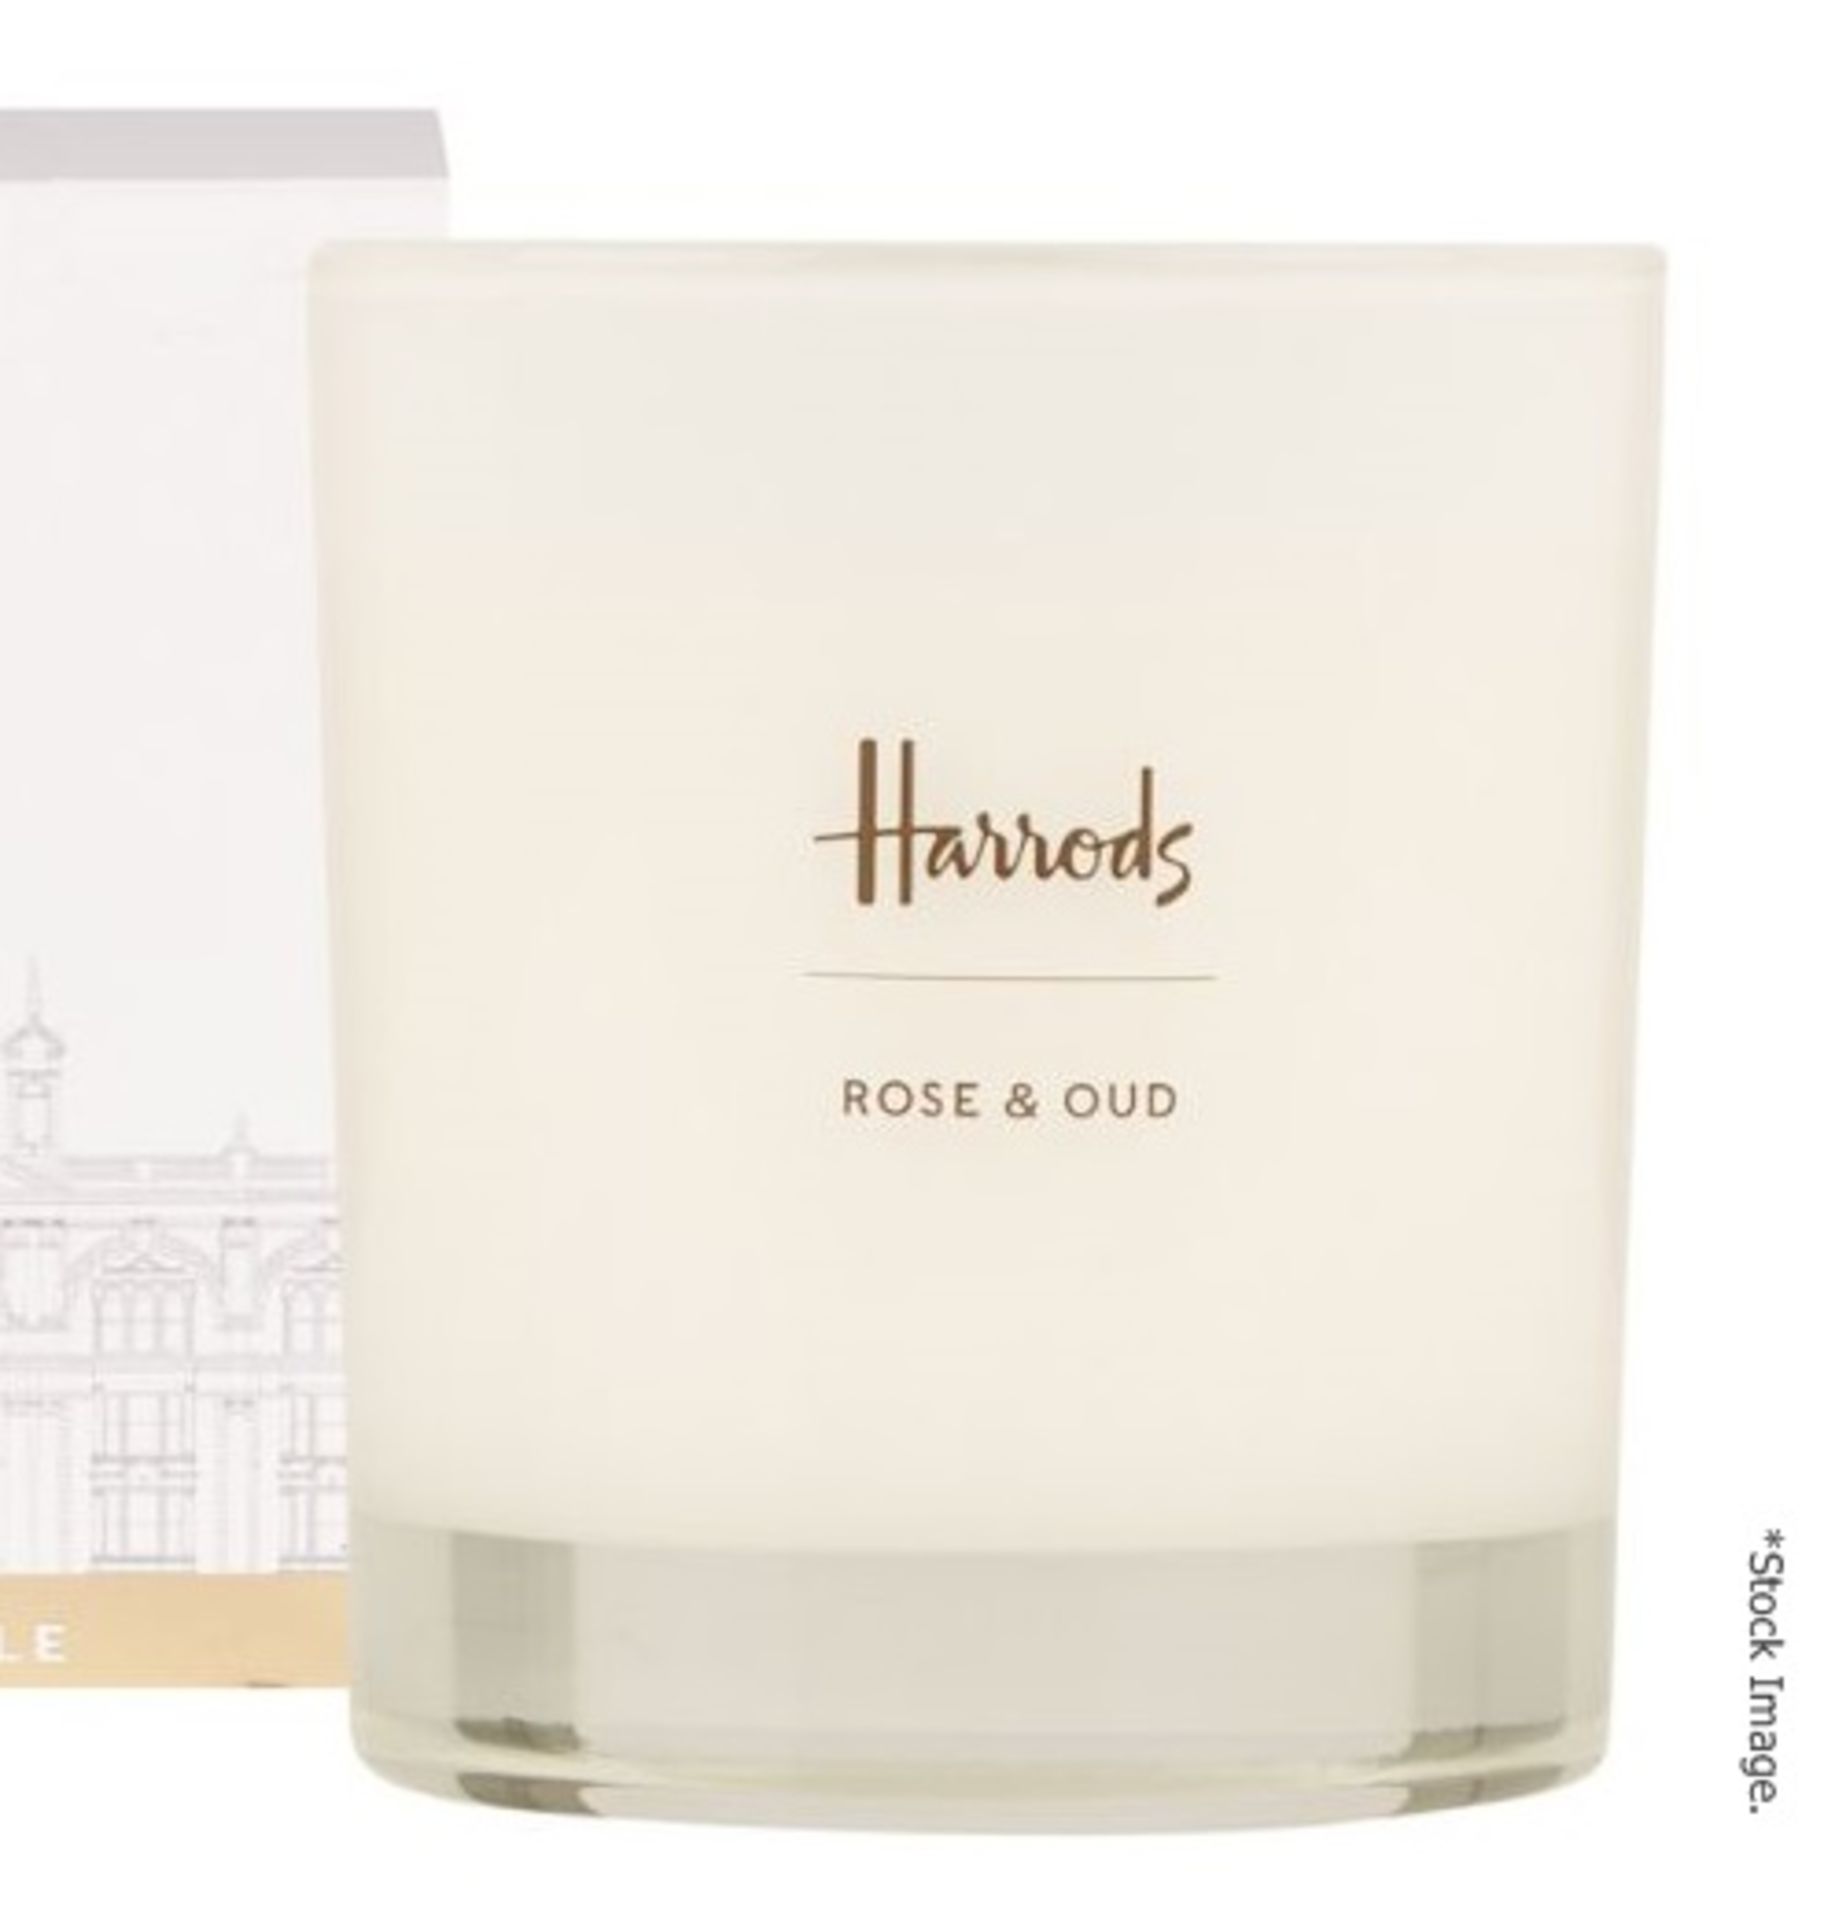 1 x HARRODS Rose And Oud Candle (230g) - Original Price £35.00 - Unused Boxed Stock